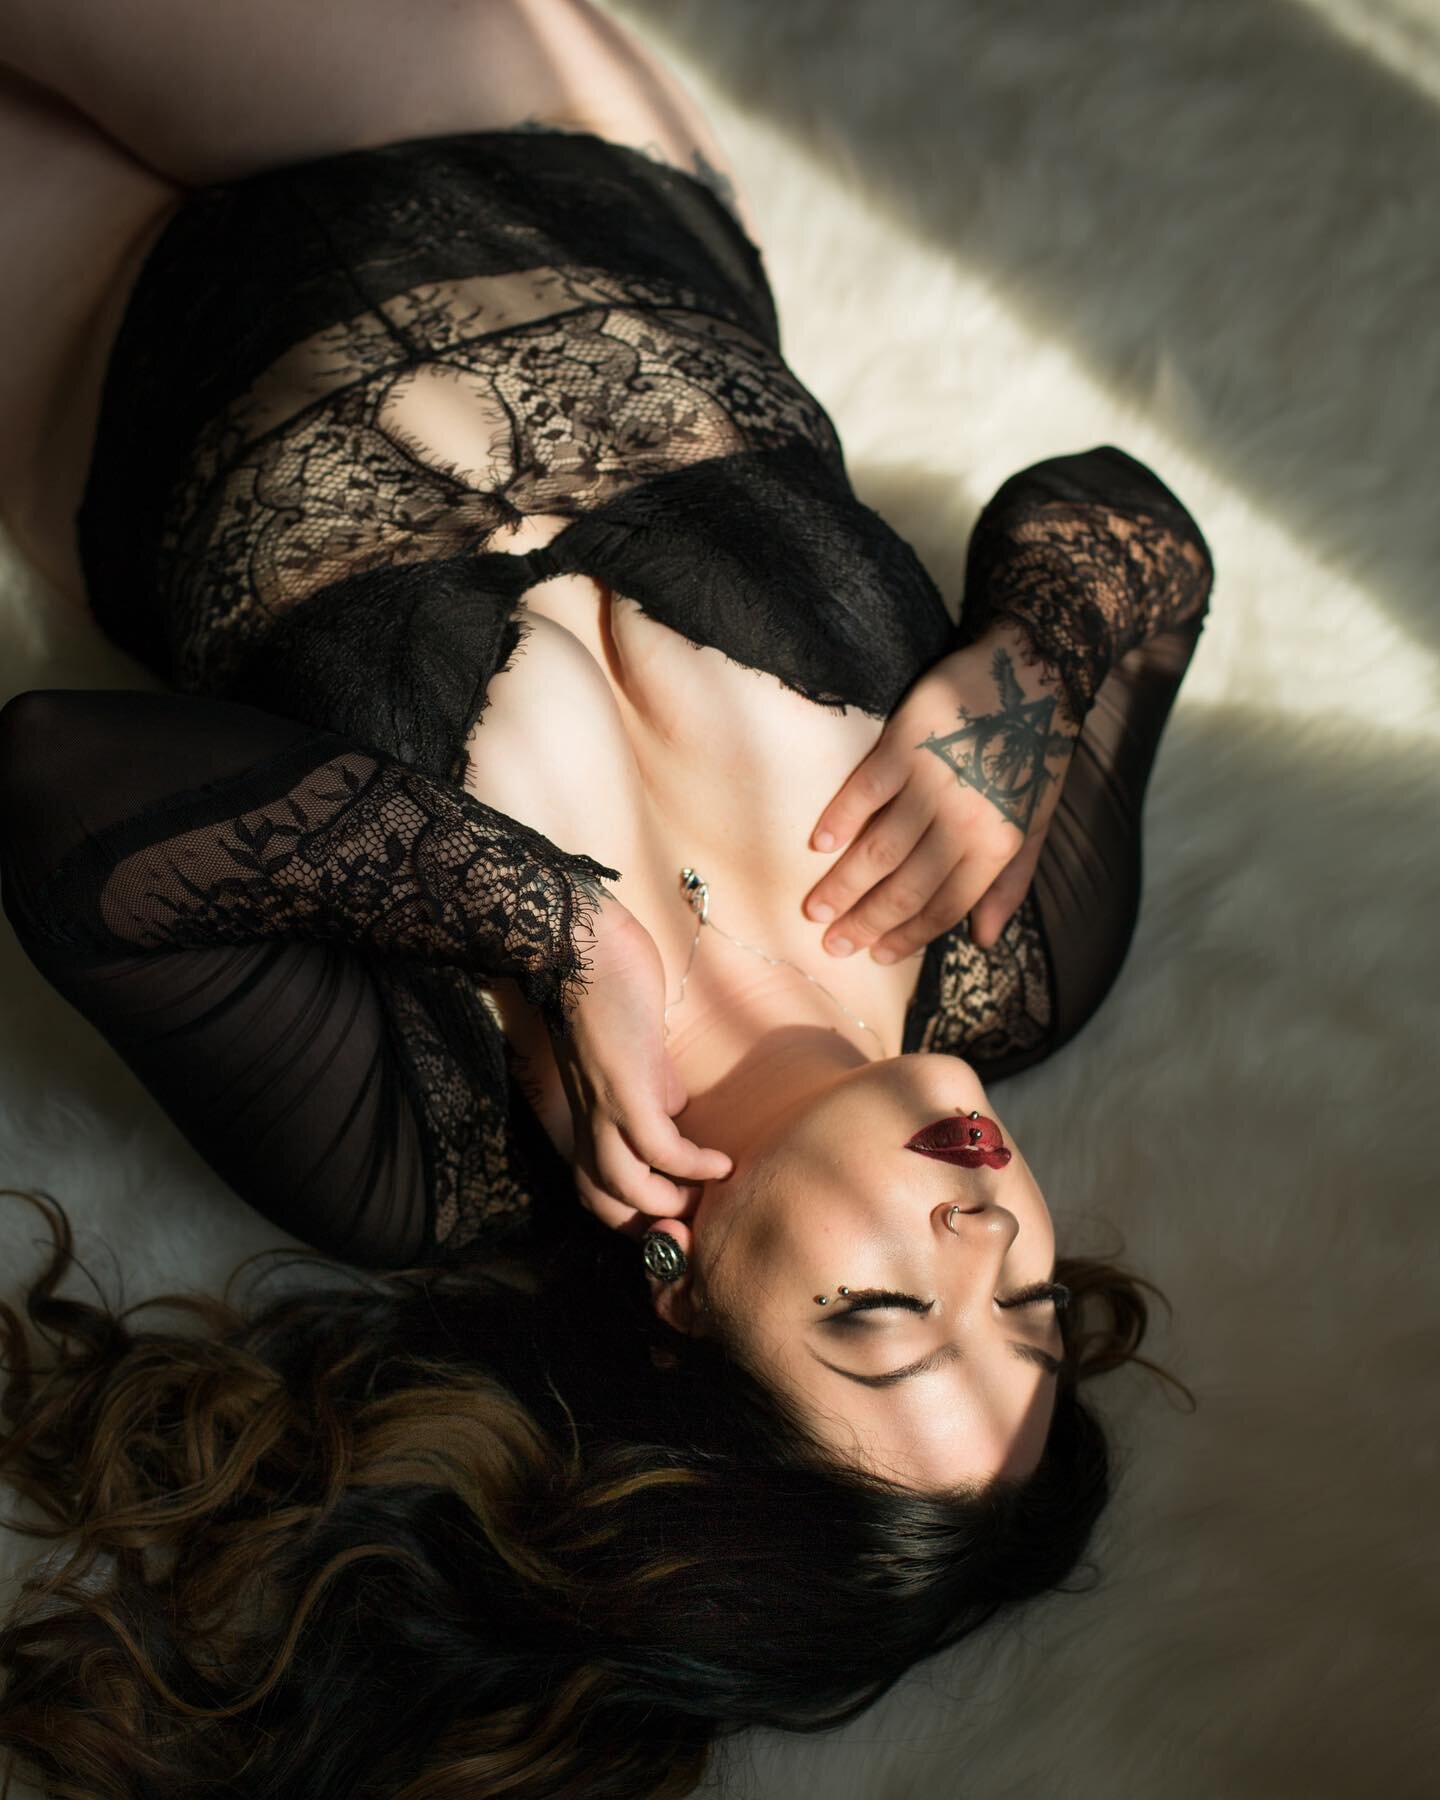 Killing me in this black long sleeve lace one piece. 🖤 Guess what?! I have this one in my client closet! 

.
.
.
#boudoirbykaleigh #moab #moabphotographer #kaleighwelchphotography